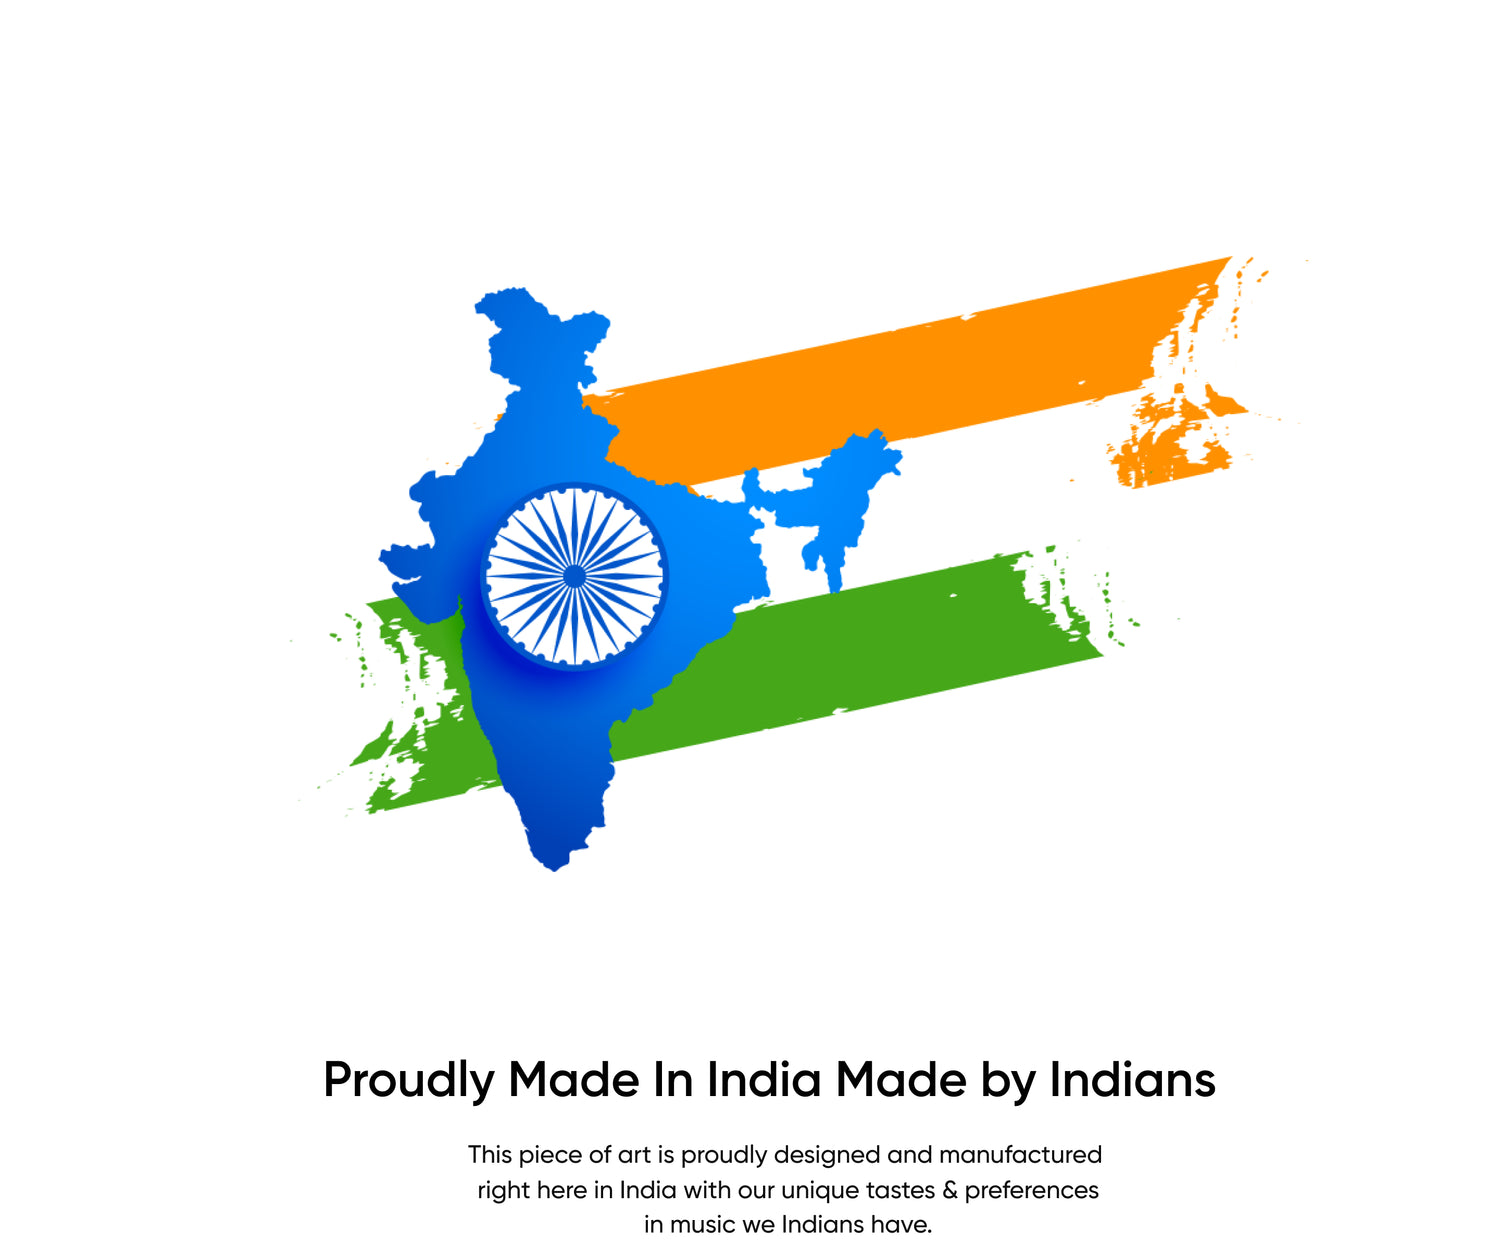 Proudly Made In India Made by Indians - This piece of art is proudly designed and manufactured right here in India with our unique tastes & preferences in music we Indians have.